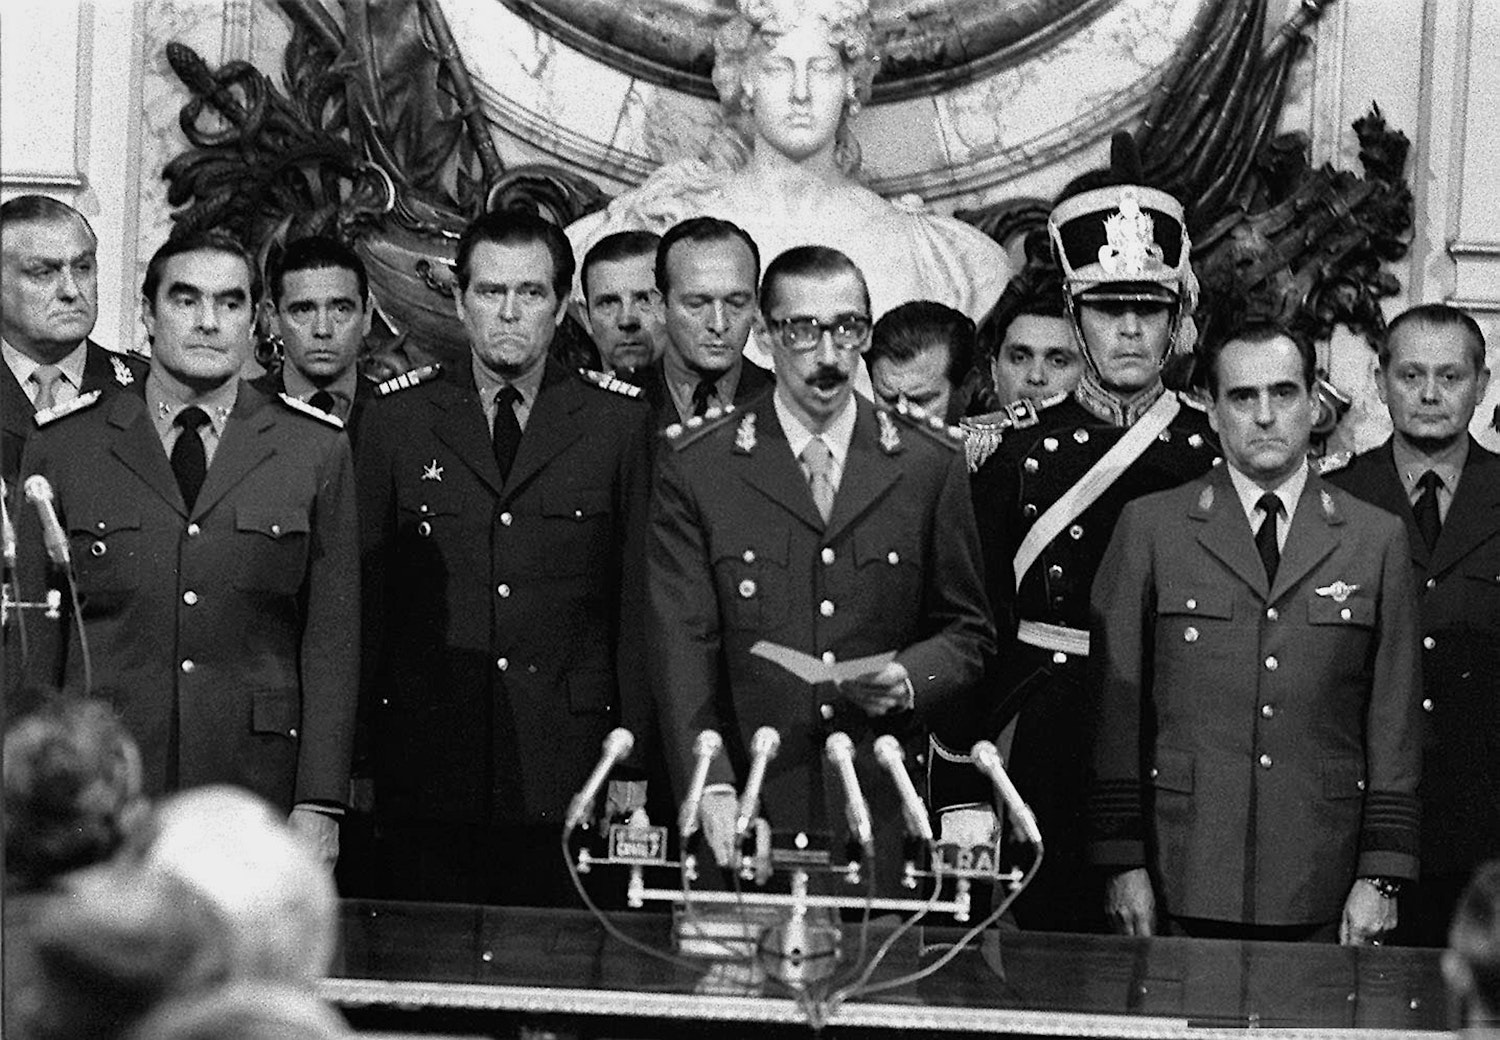 Gen. Videla and his officers dressed in military uniforms. Gen Videla stands in front of microphones for the presidential oath. Details in text.